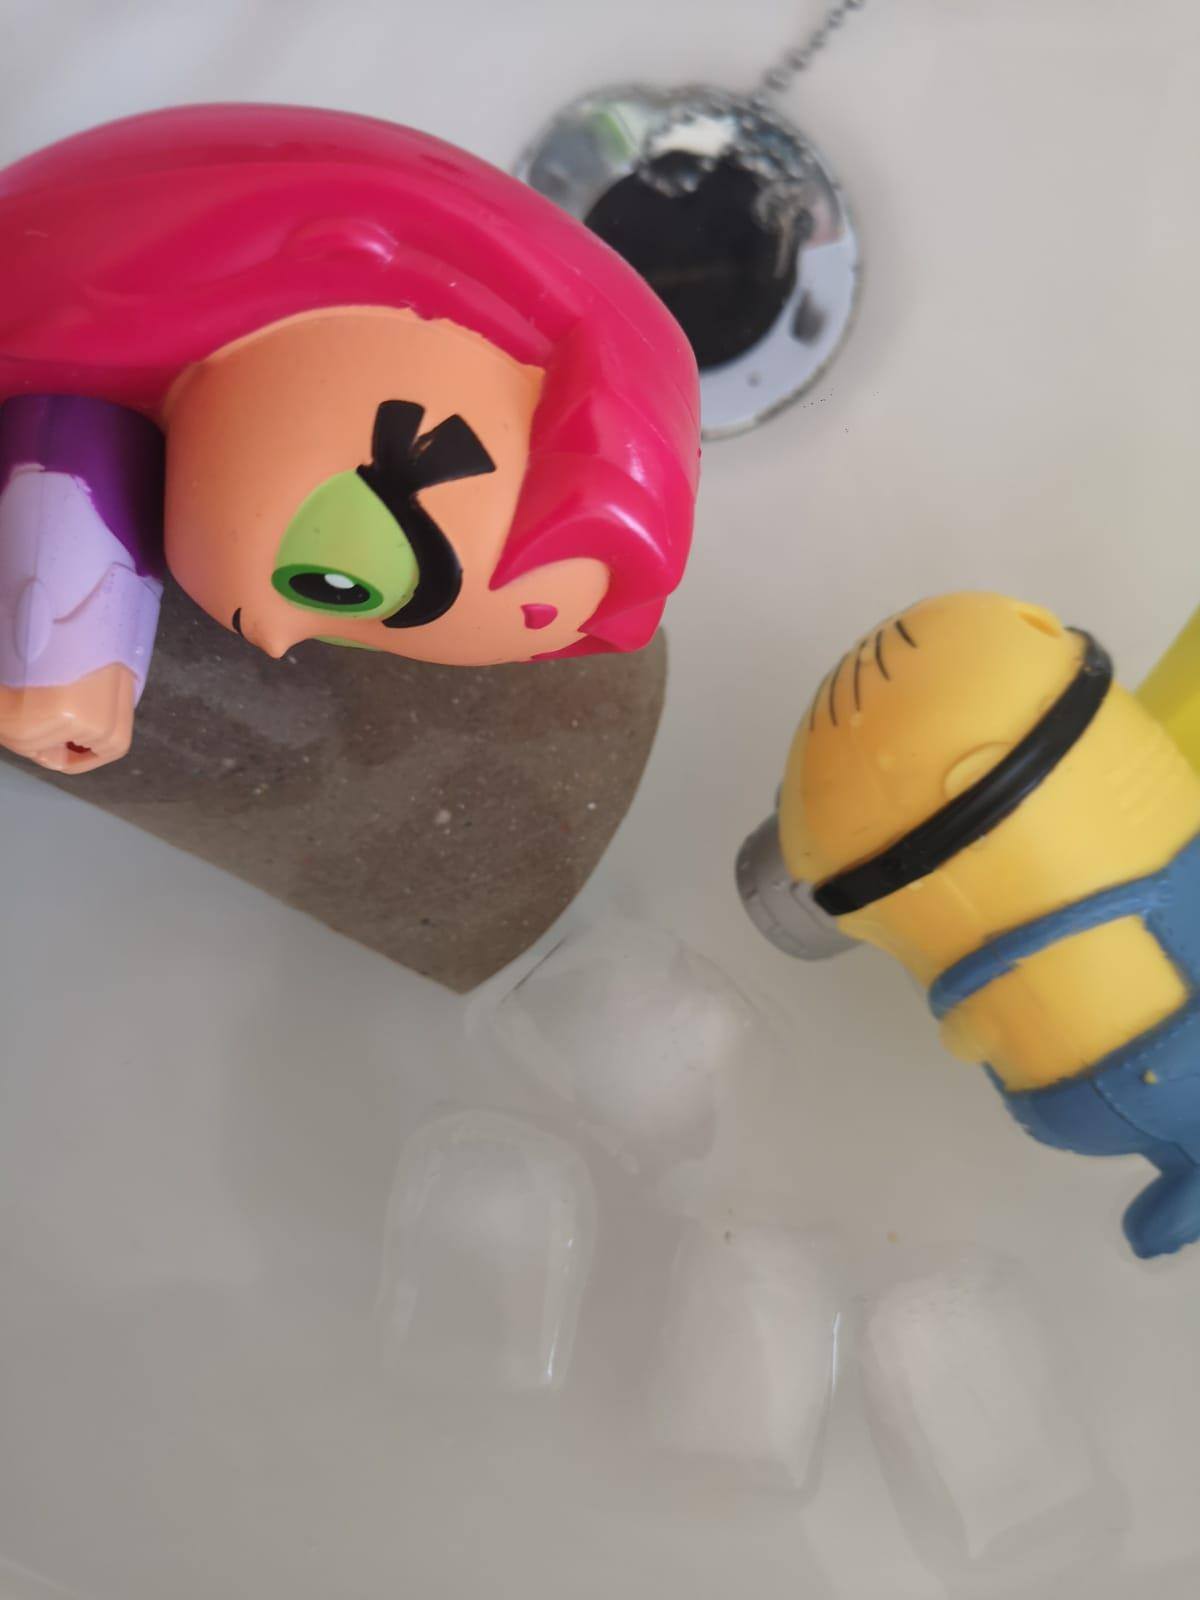 Toys in bath of ice